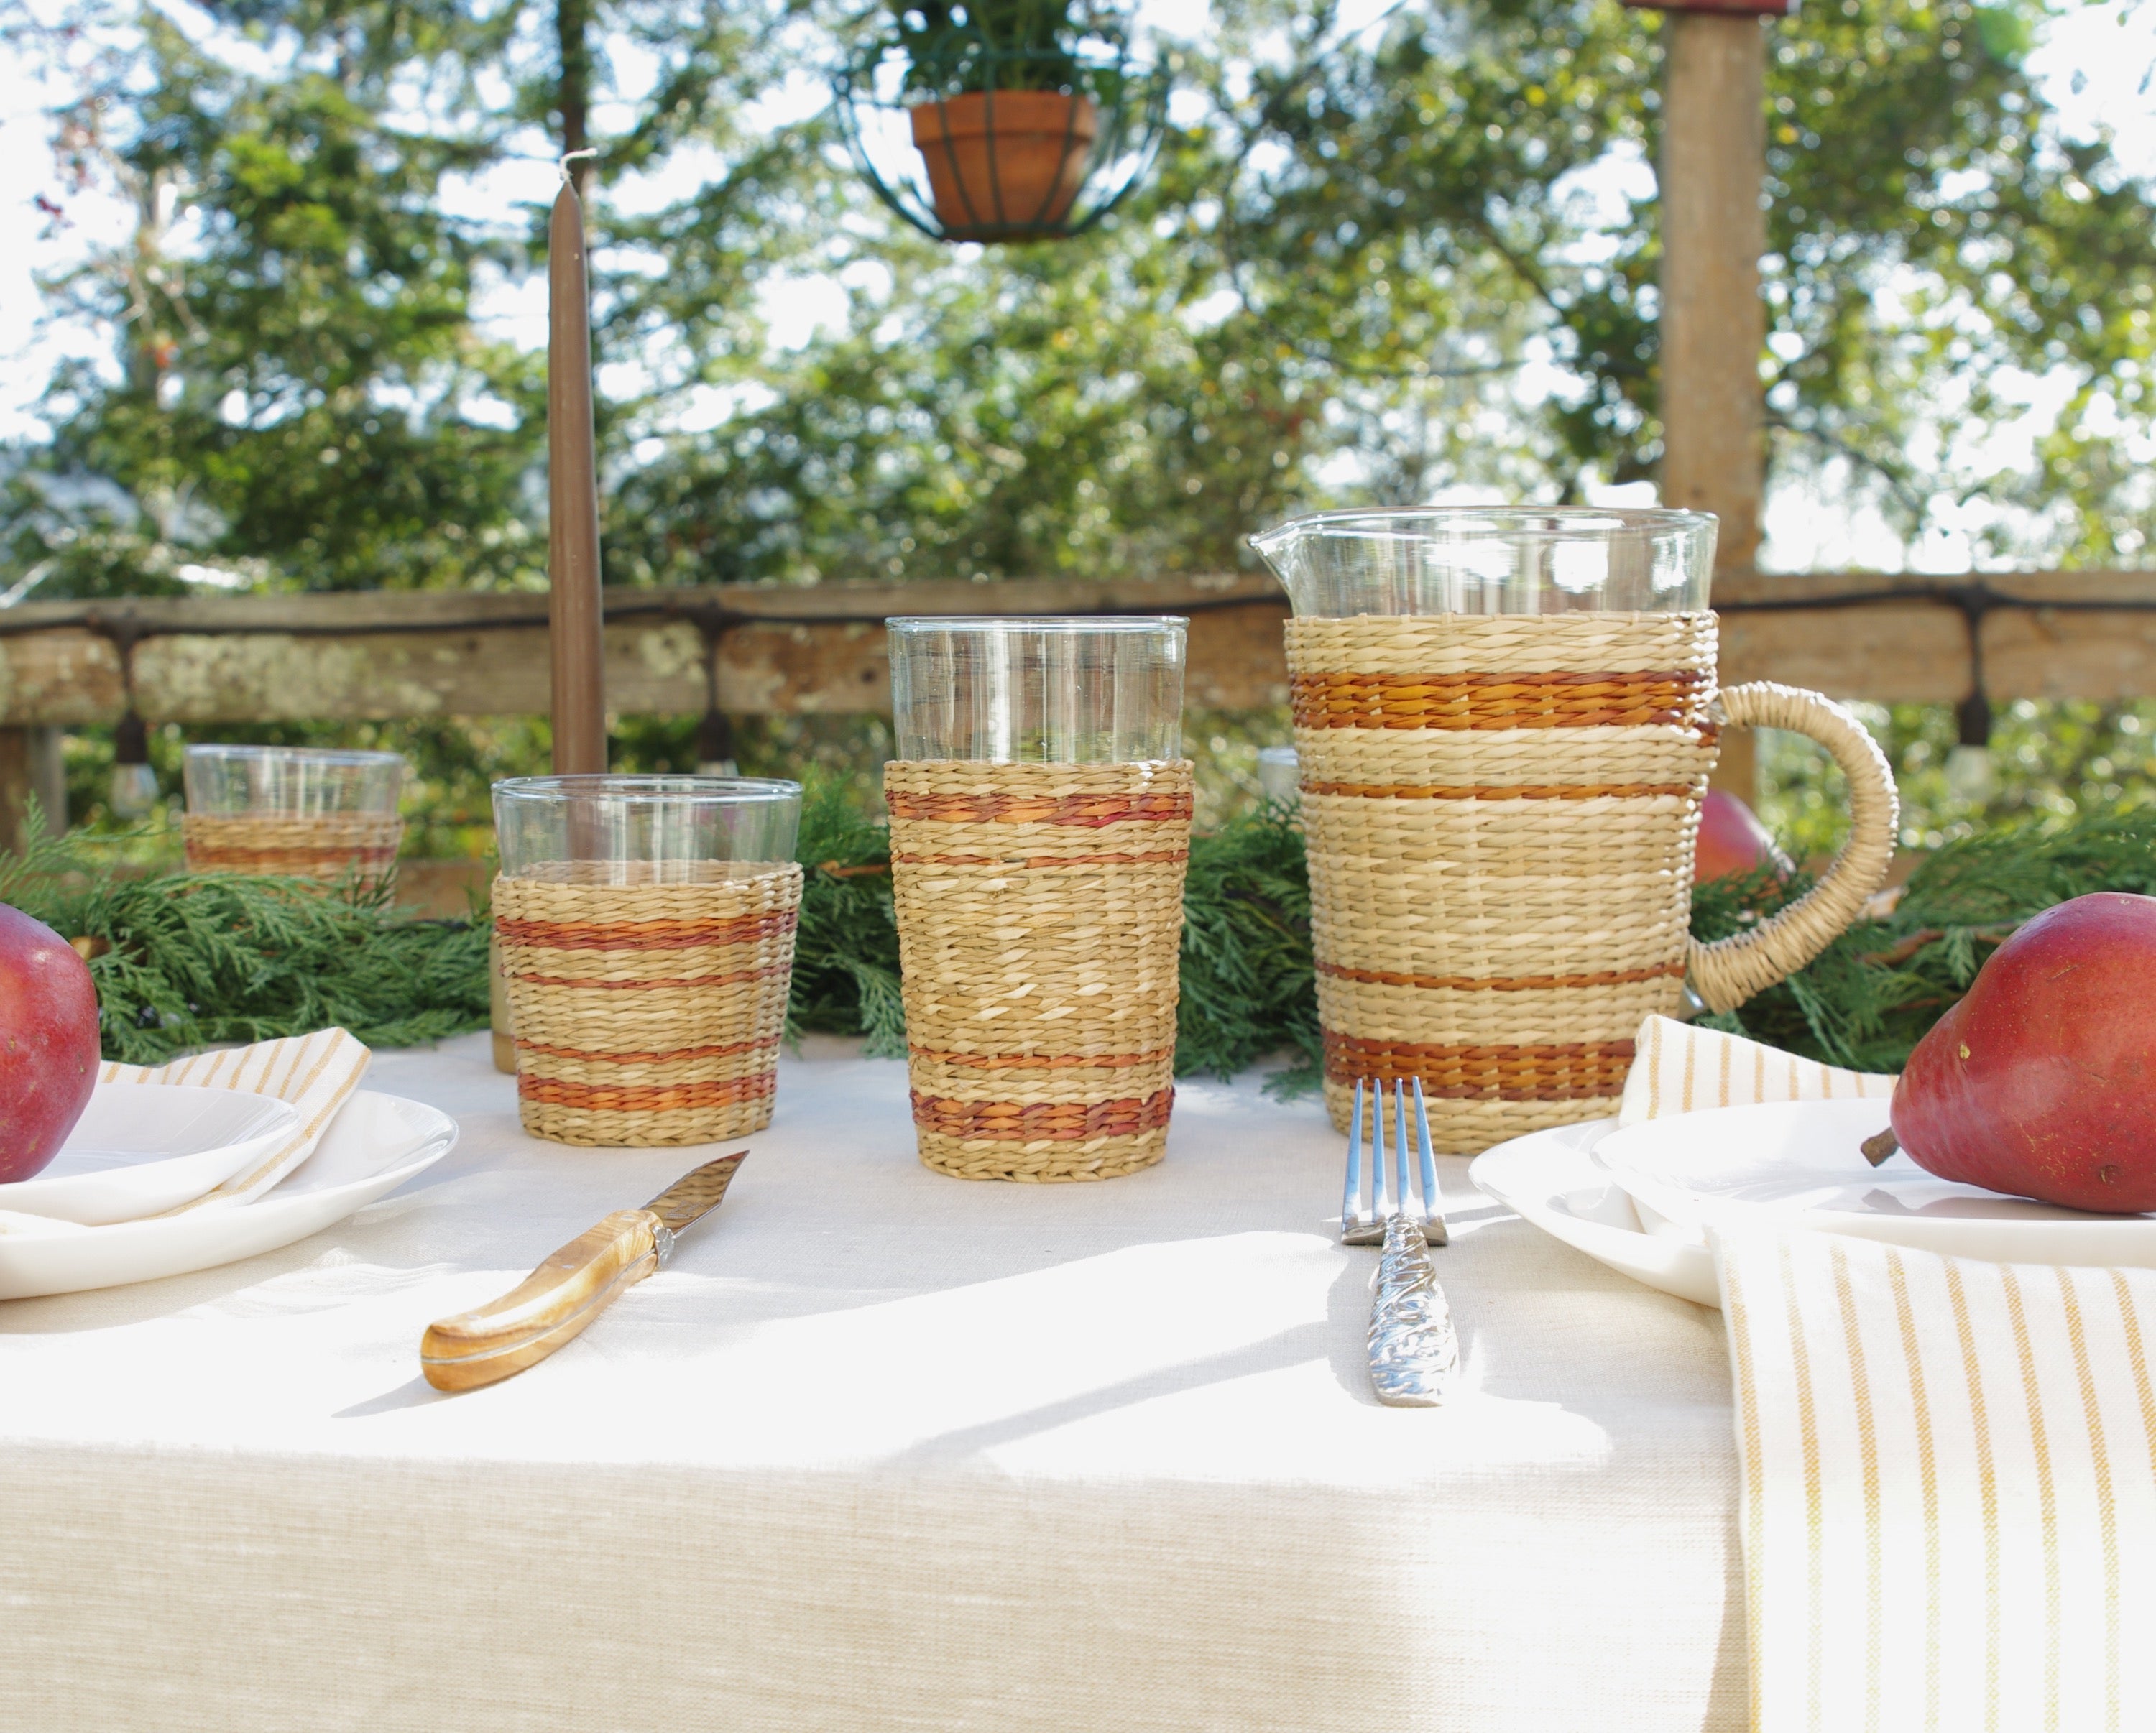 Brown Striped Seagrass Highball (Now 25% off!) Glass Seagrass Brand_Seagrass & Rattan Kitchen_Drinkware lm New Arrivals Seagrass Tumblers & Highballs 6AC34968-E947-4DA9-A900-893EDF9B3D0B_4e7e7fe2-d37f-444c-b7aa-78b34d01ff25